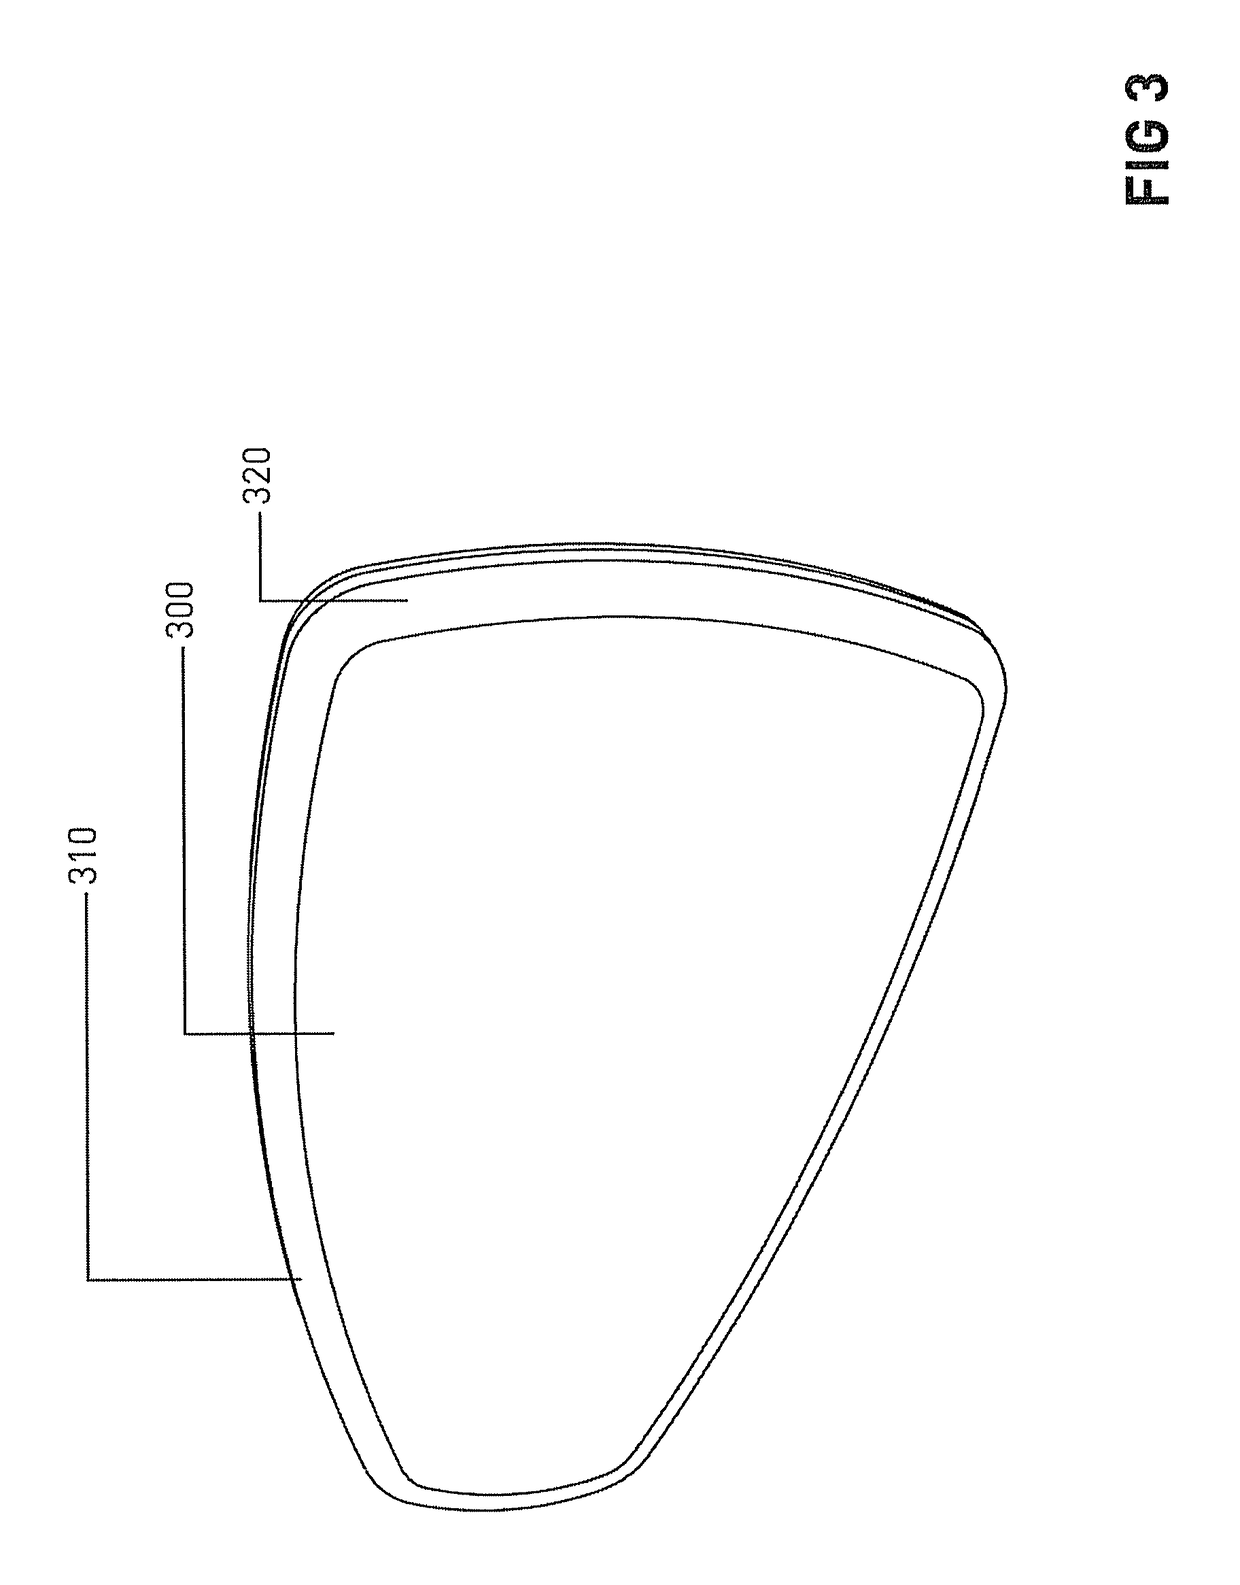 Compression undergarment for relief of menstrual pain and related method of use